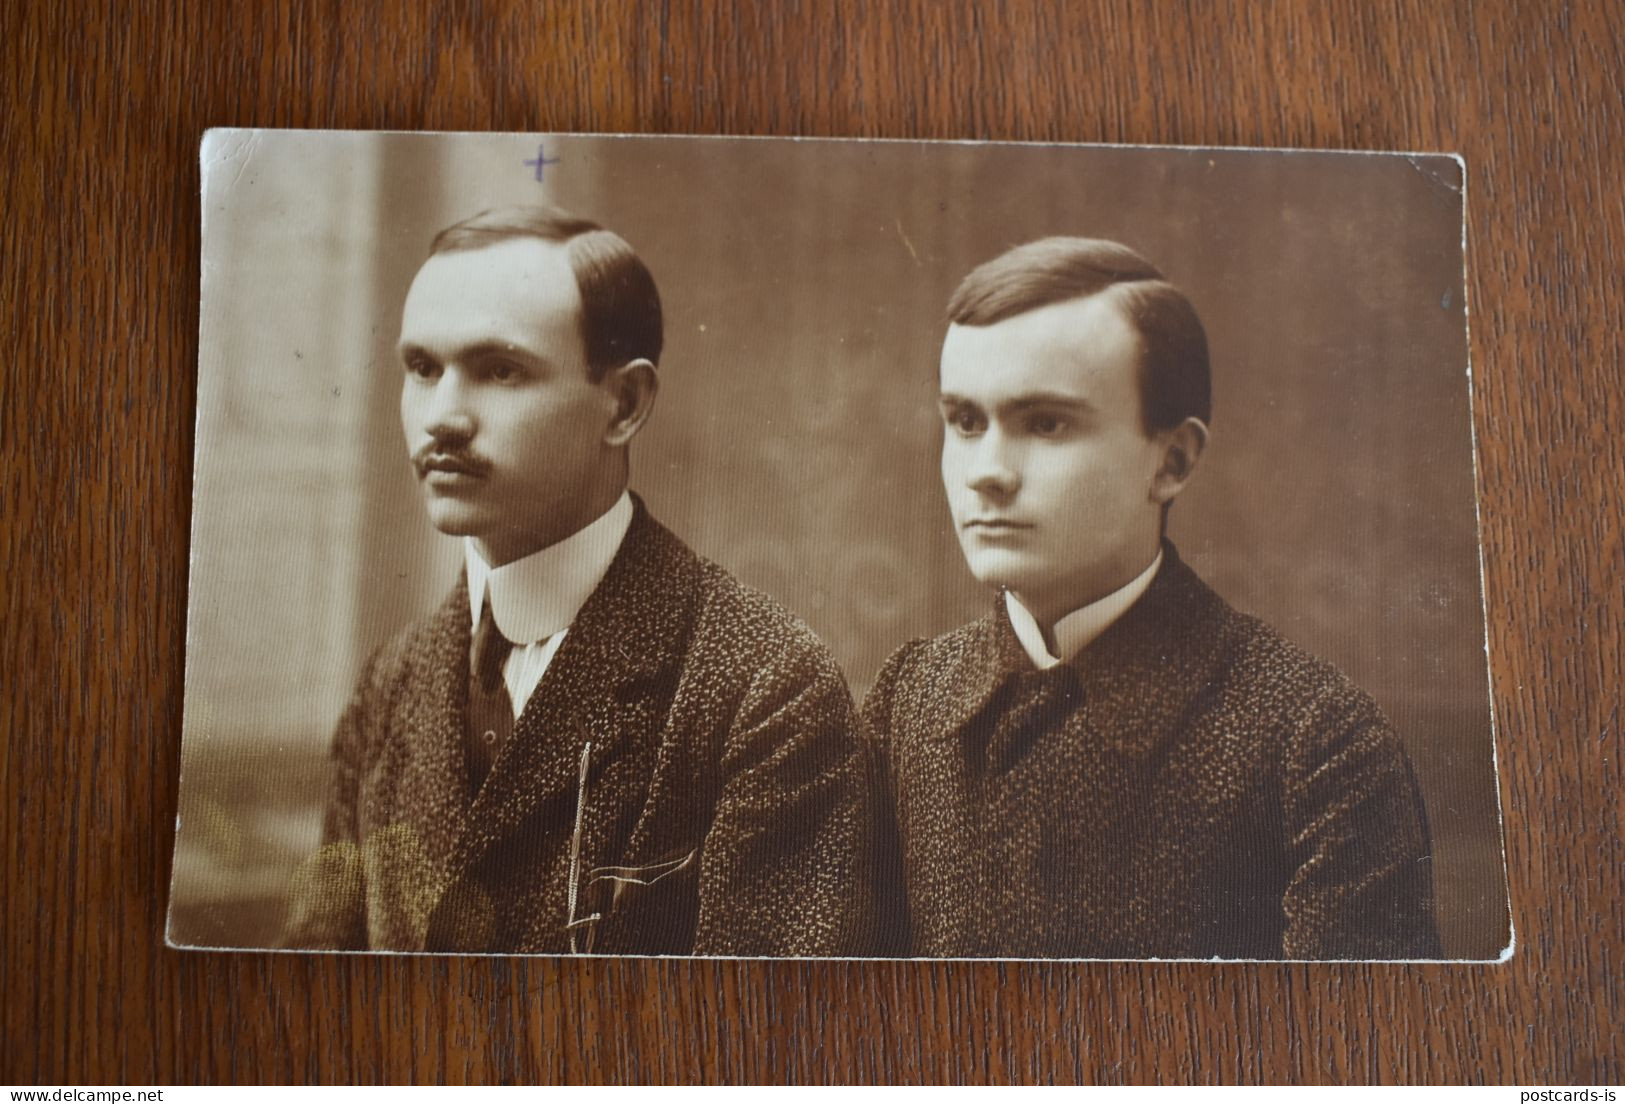 F2081 Photo Romania Two Brothers - Photographs